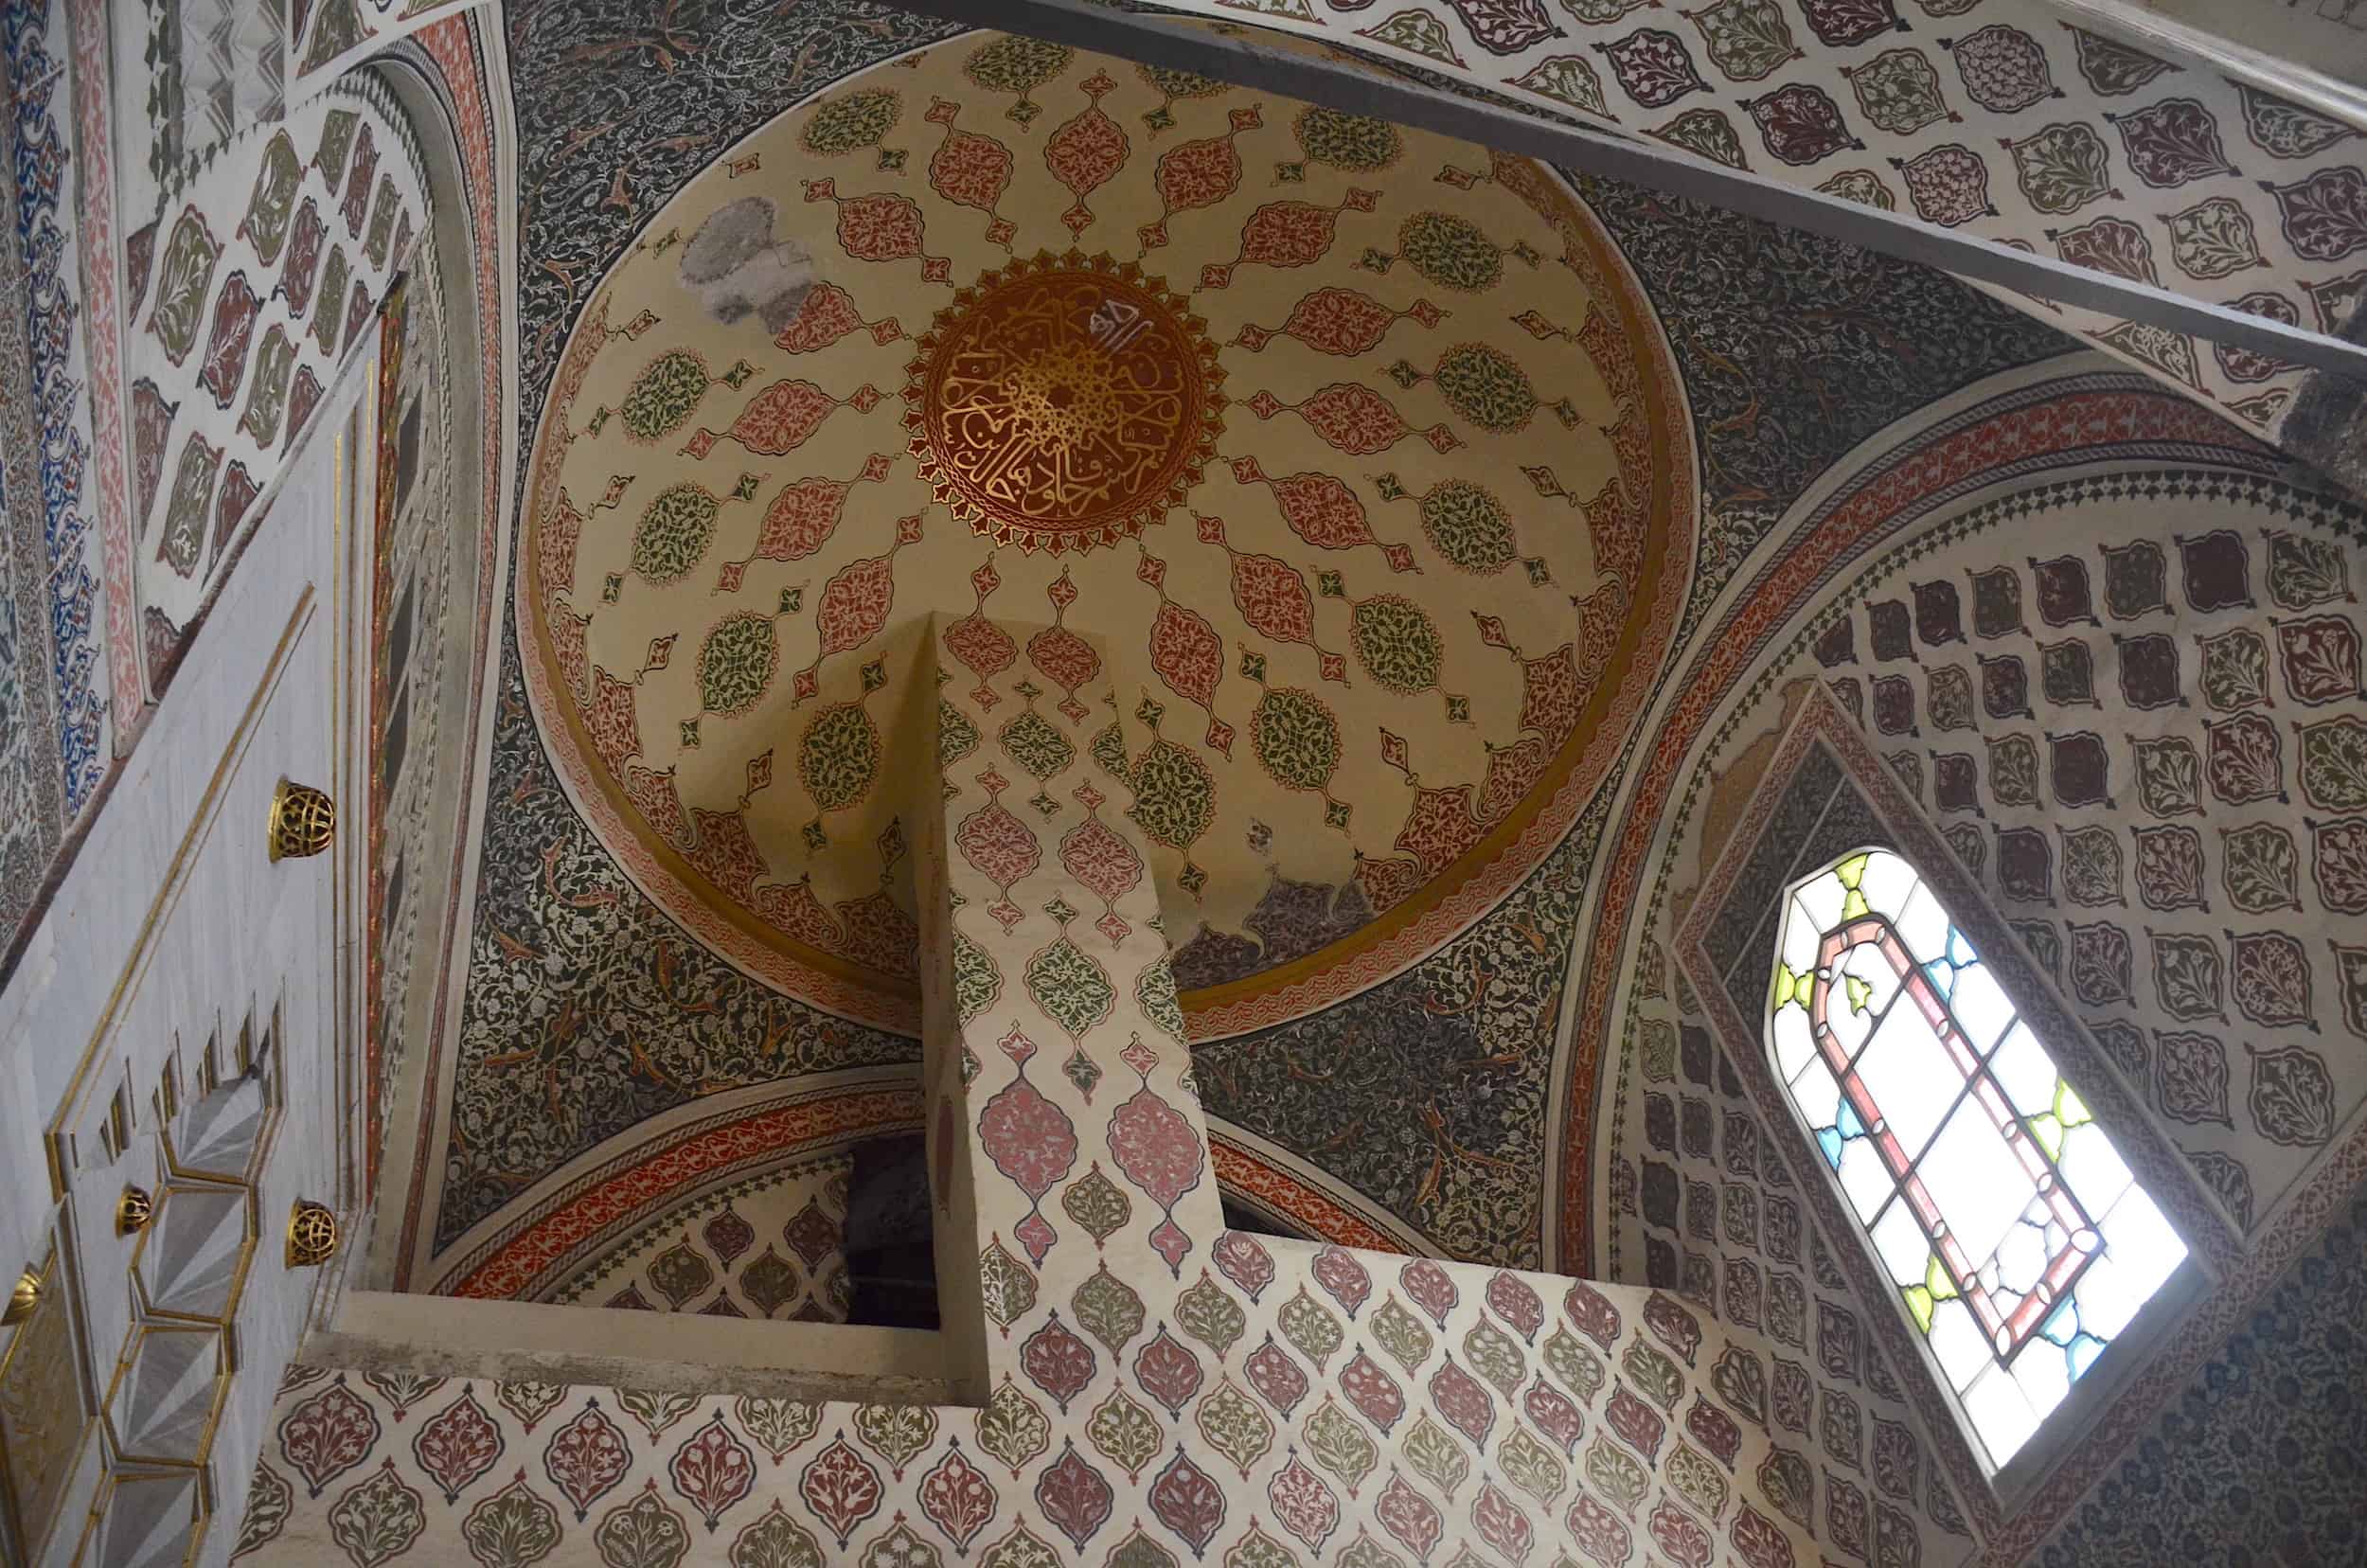 Dome of the vestibule in the Imperial Harem at Topkapi Palace in Istanbul, Turkey